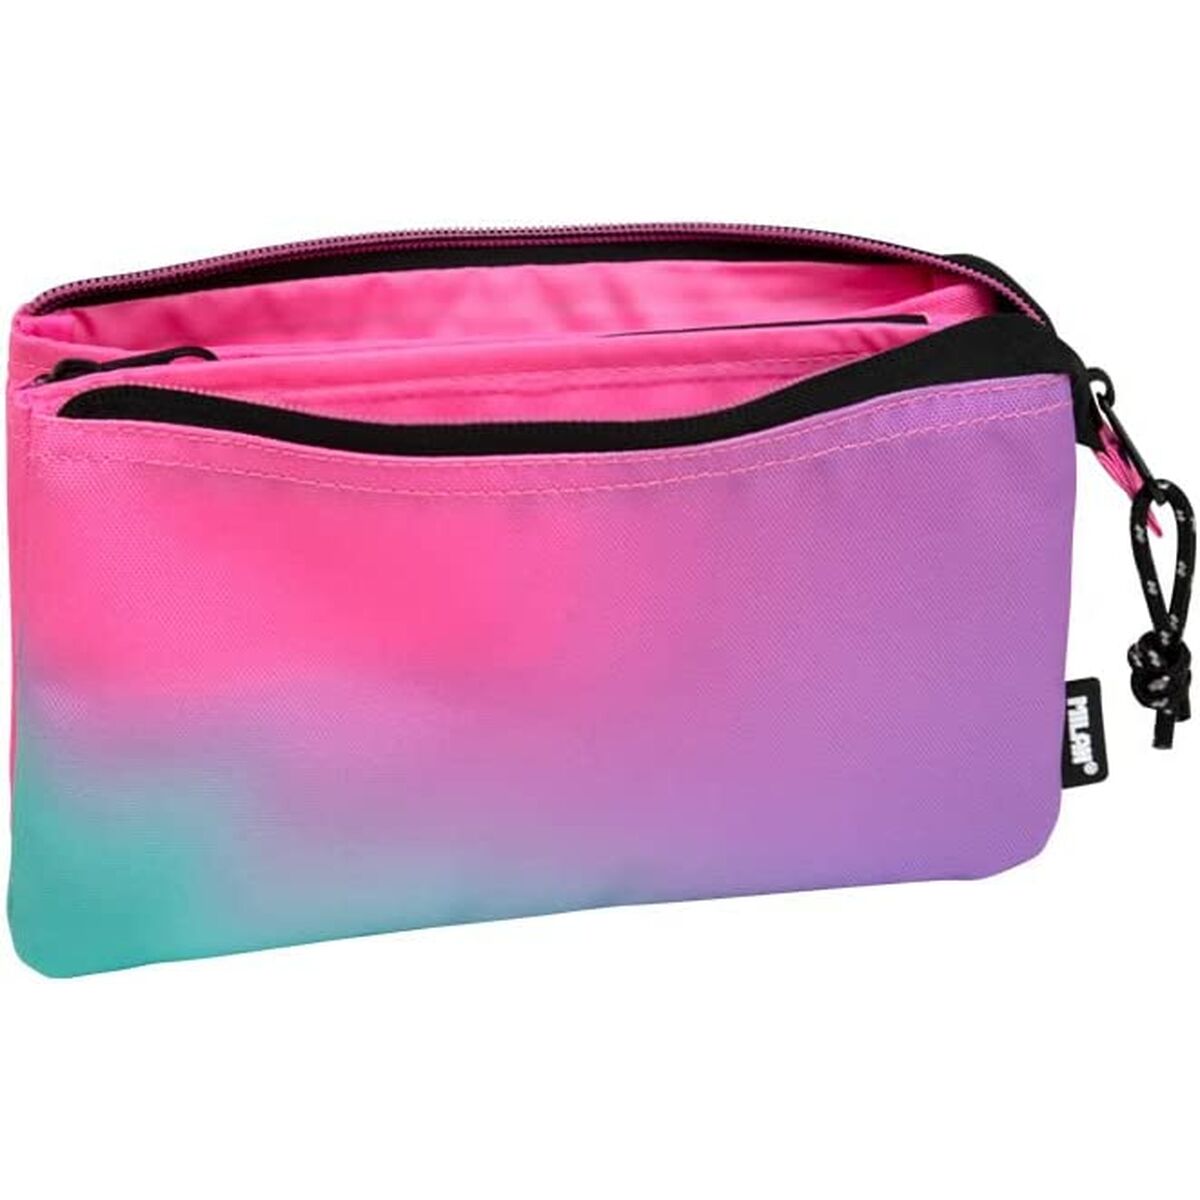 Holdall Milan Sunset 5 compartments Pink (22 x 12 x 4 cm)